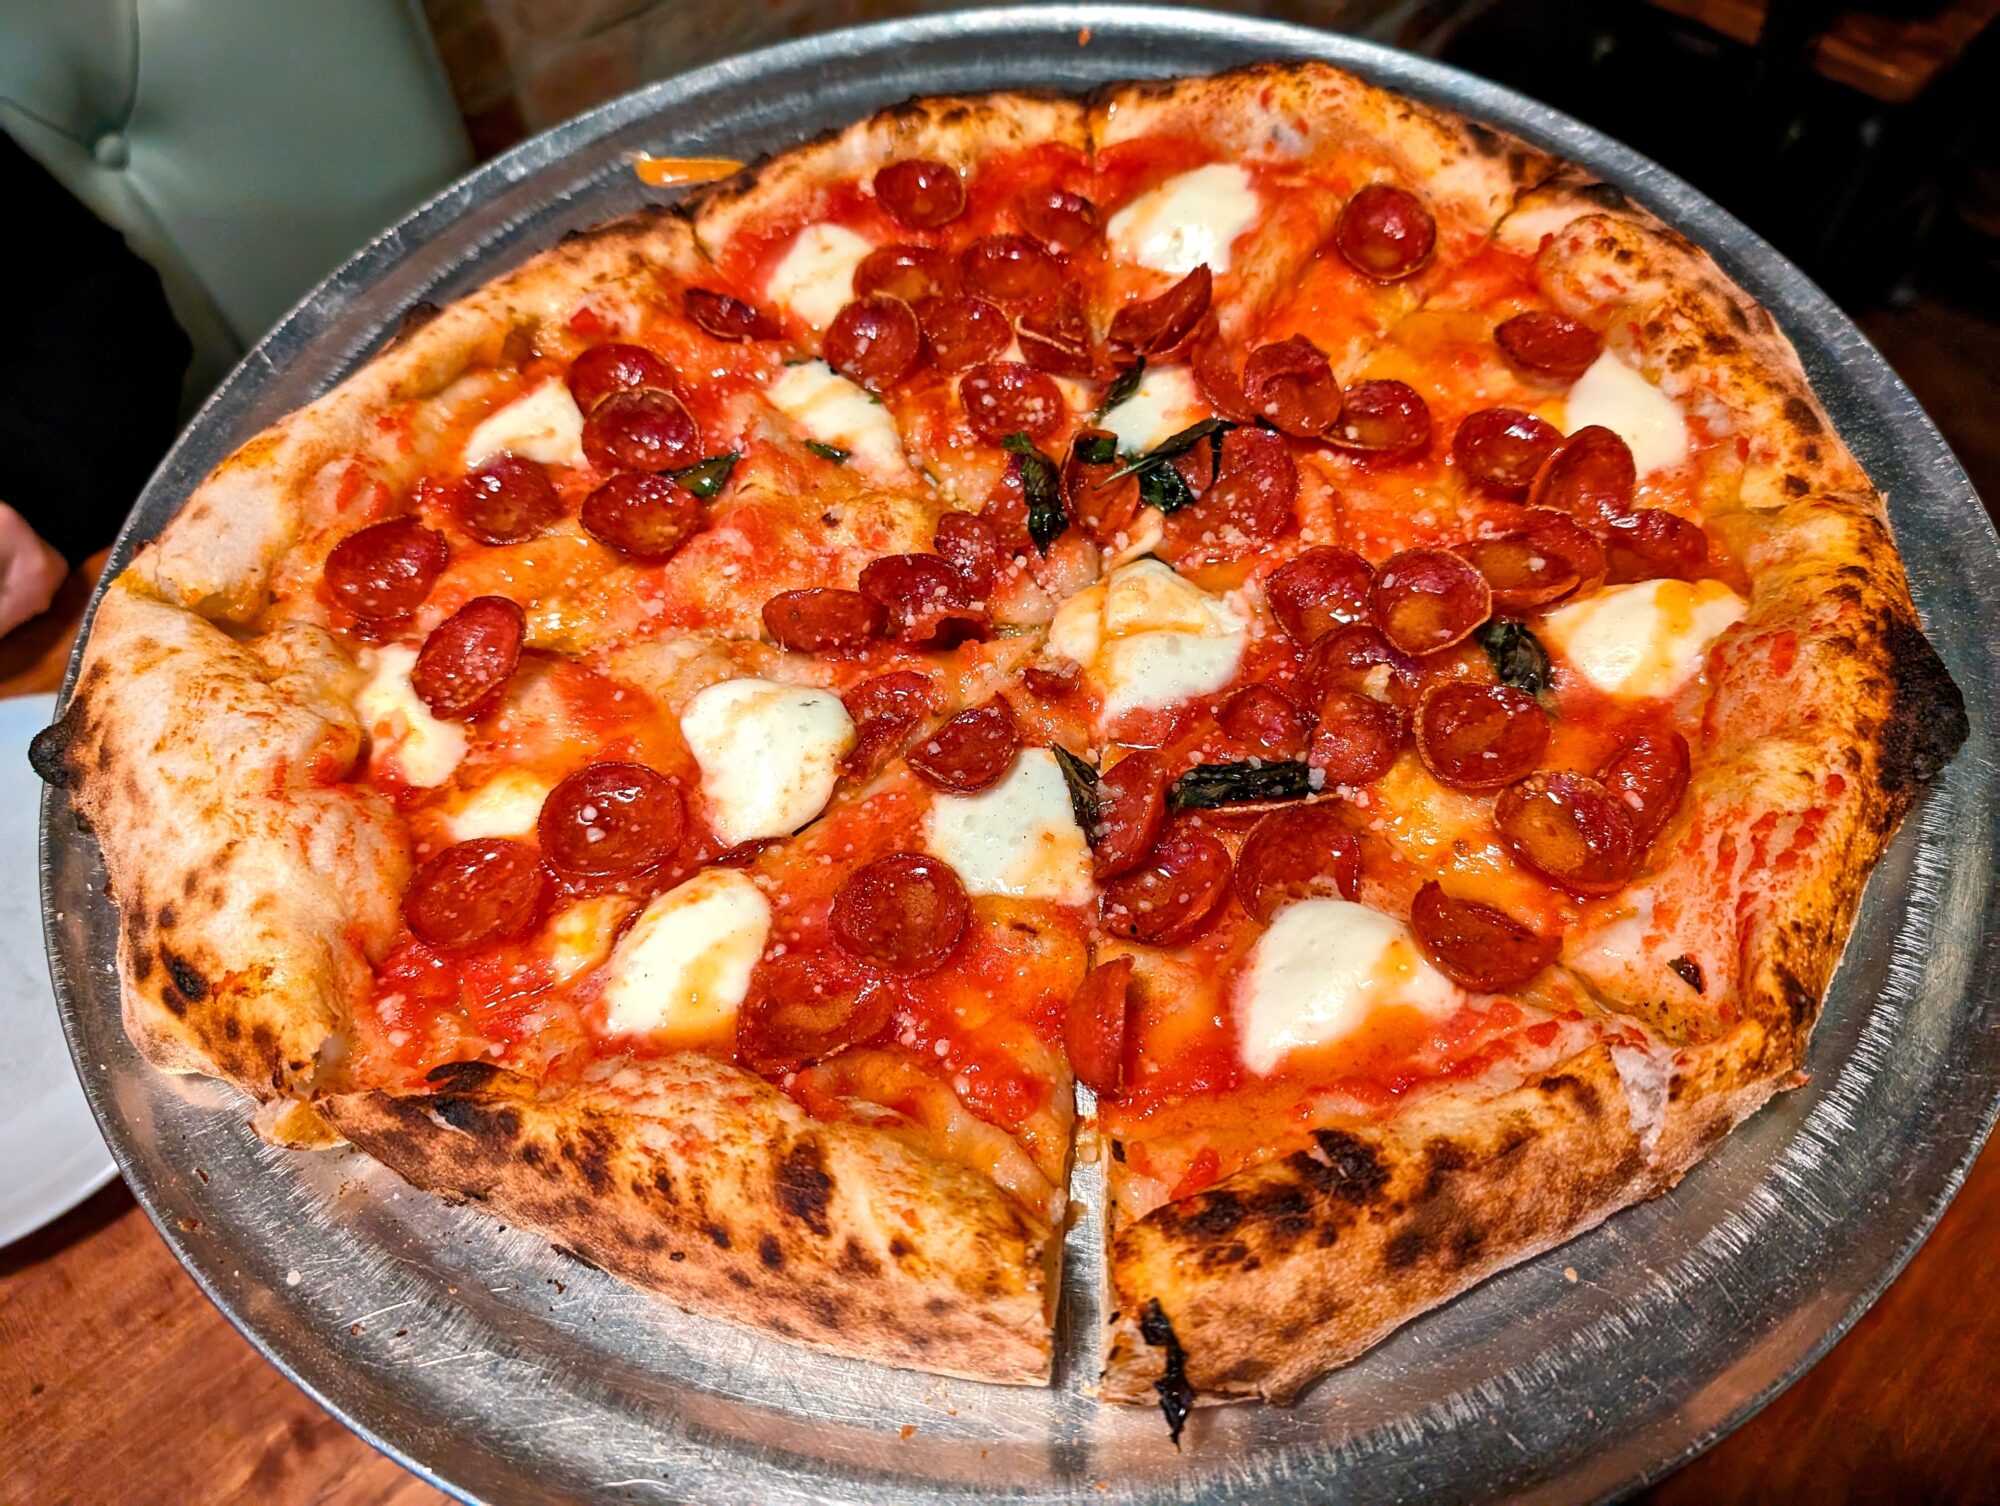 A pepperoni pizza in Louisville